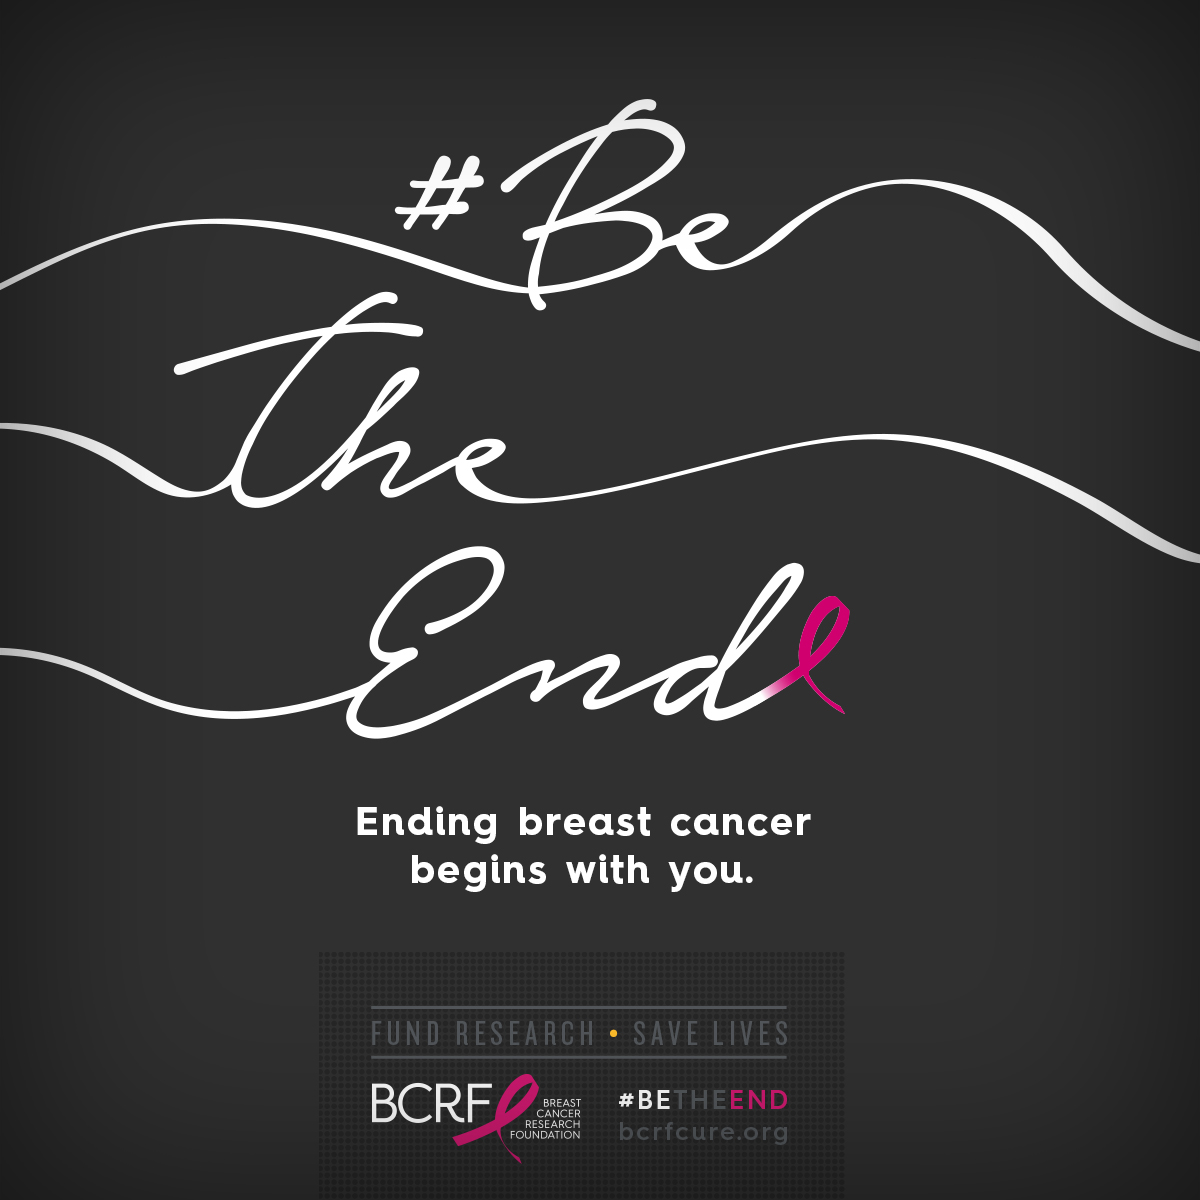 Be The End Ending Breast Cancer begins with you